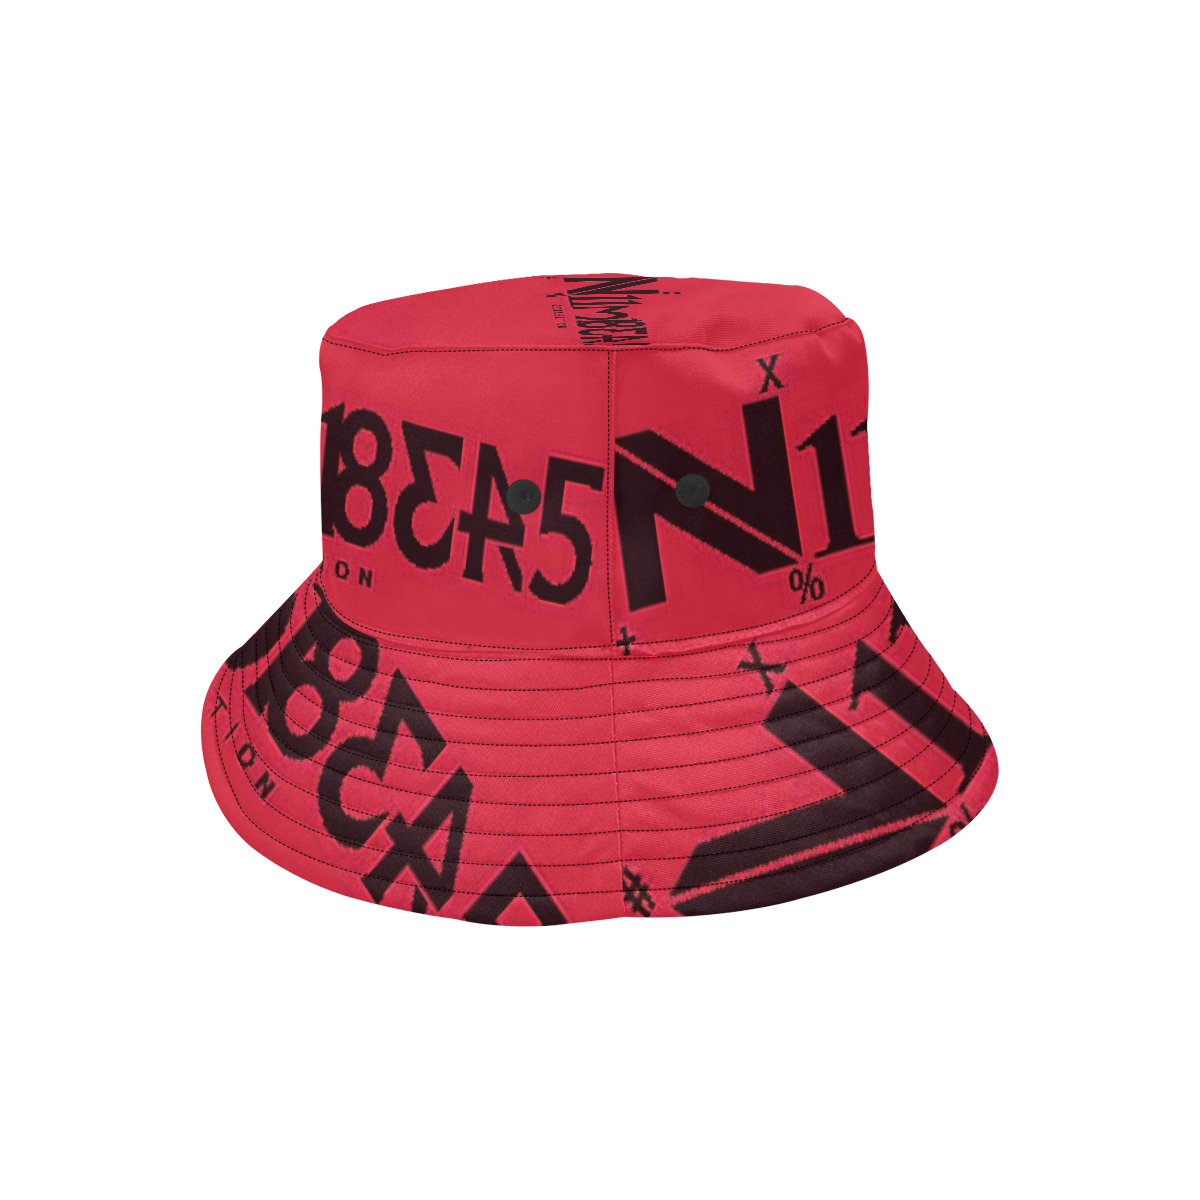 NUMBERS Collection LOGO Cherry Red All Over Print Bucket Hat